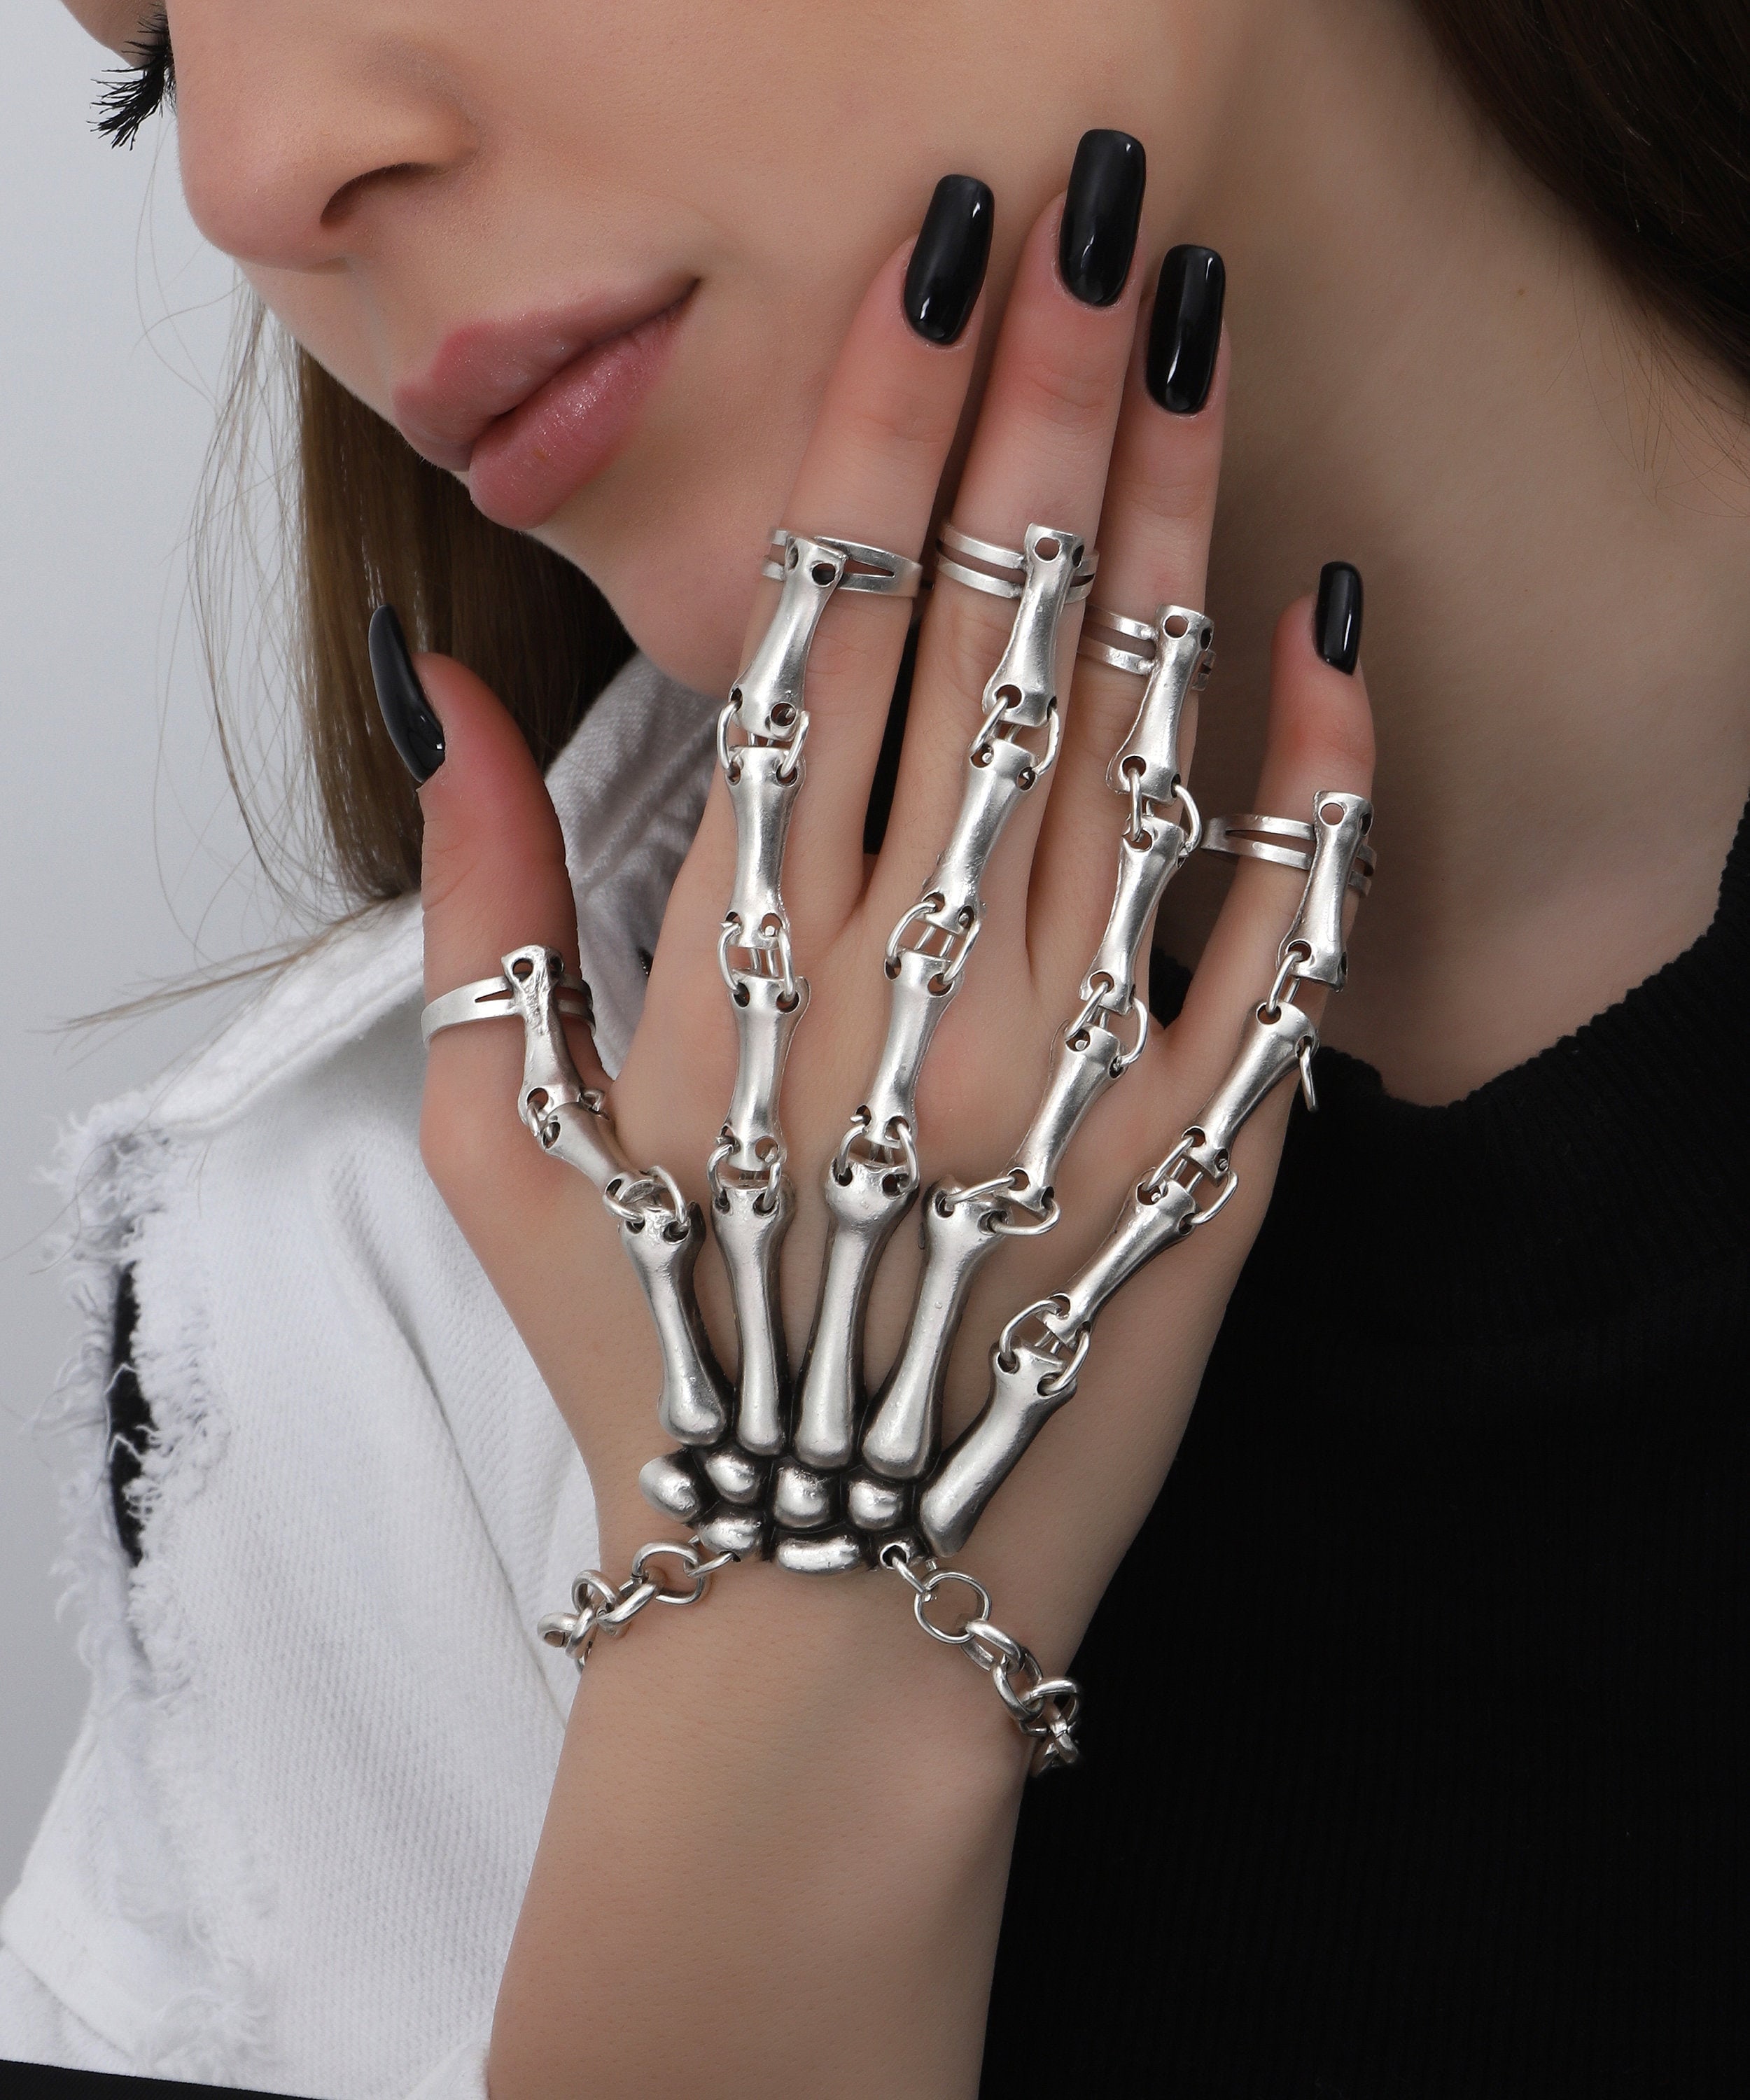 Dropship Unique Exaggerate Skull Bracelet With Rings Skeleton Hand Harness  Slave Bracelet Punk Ghost Claw Skeleton Accessories For Festival Cosplay  Costume to Sell Online at a Lower Price